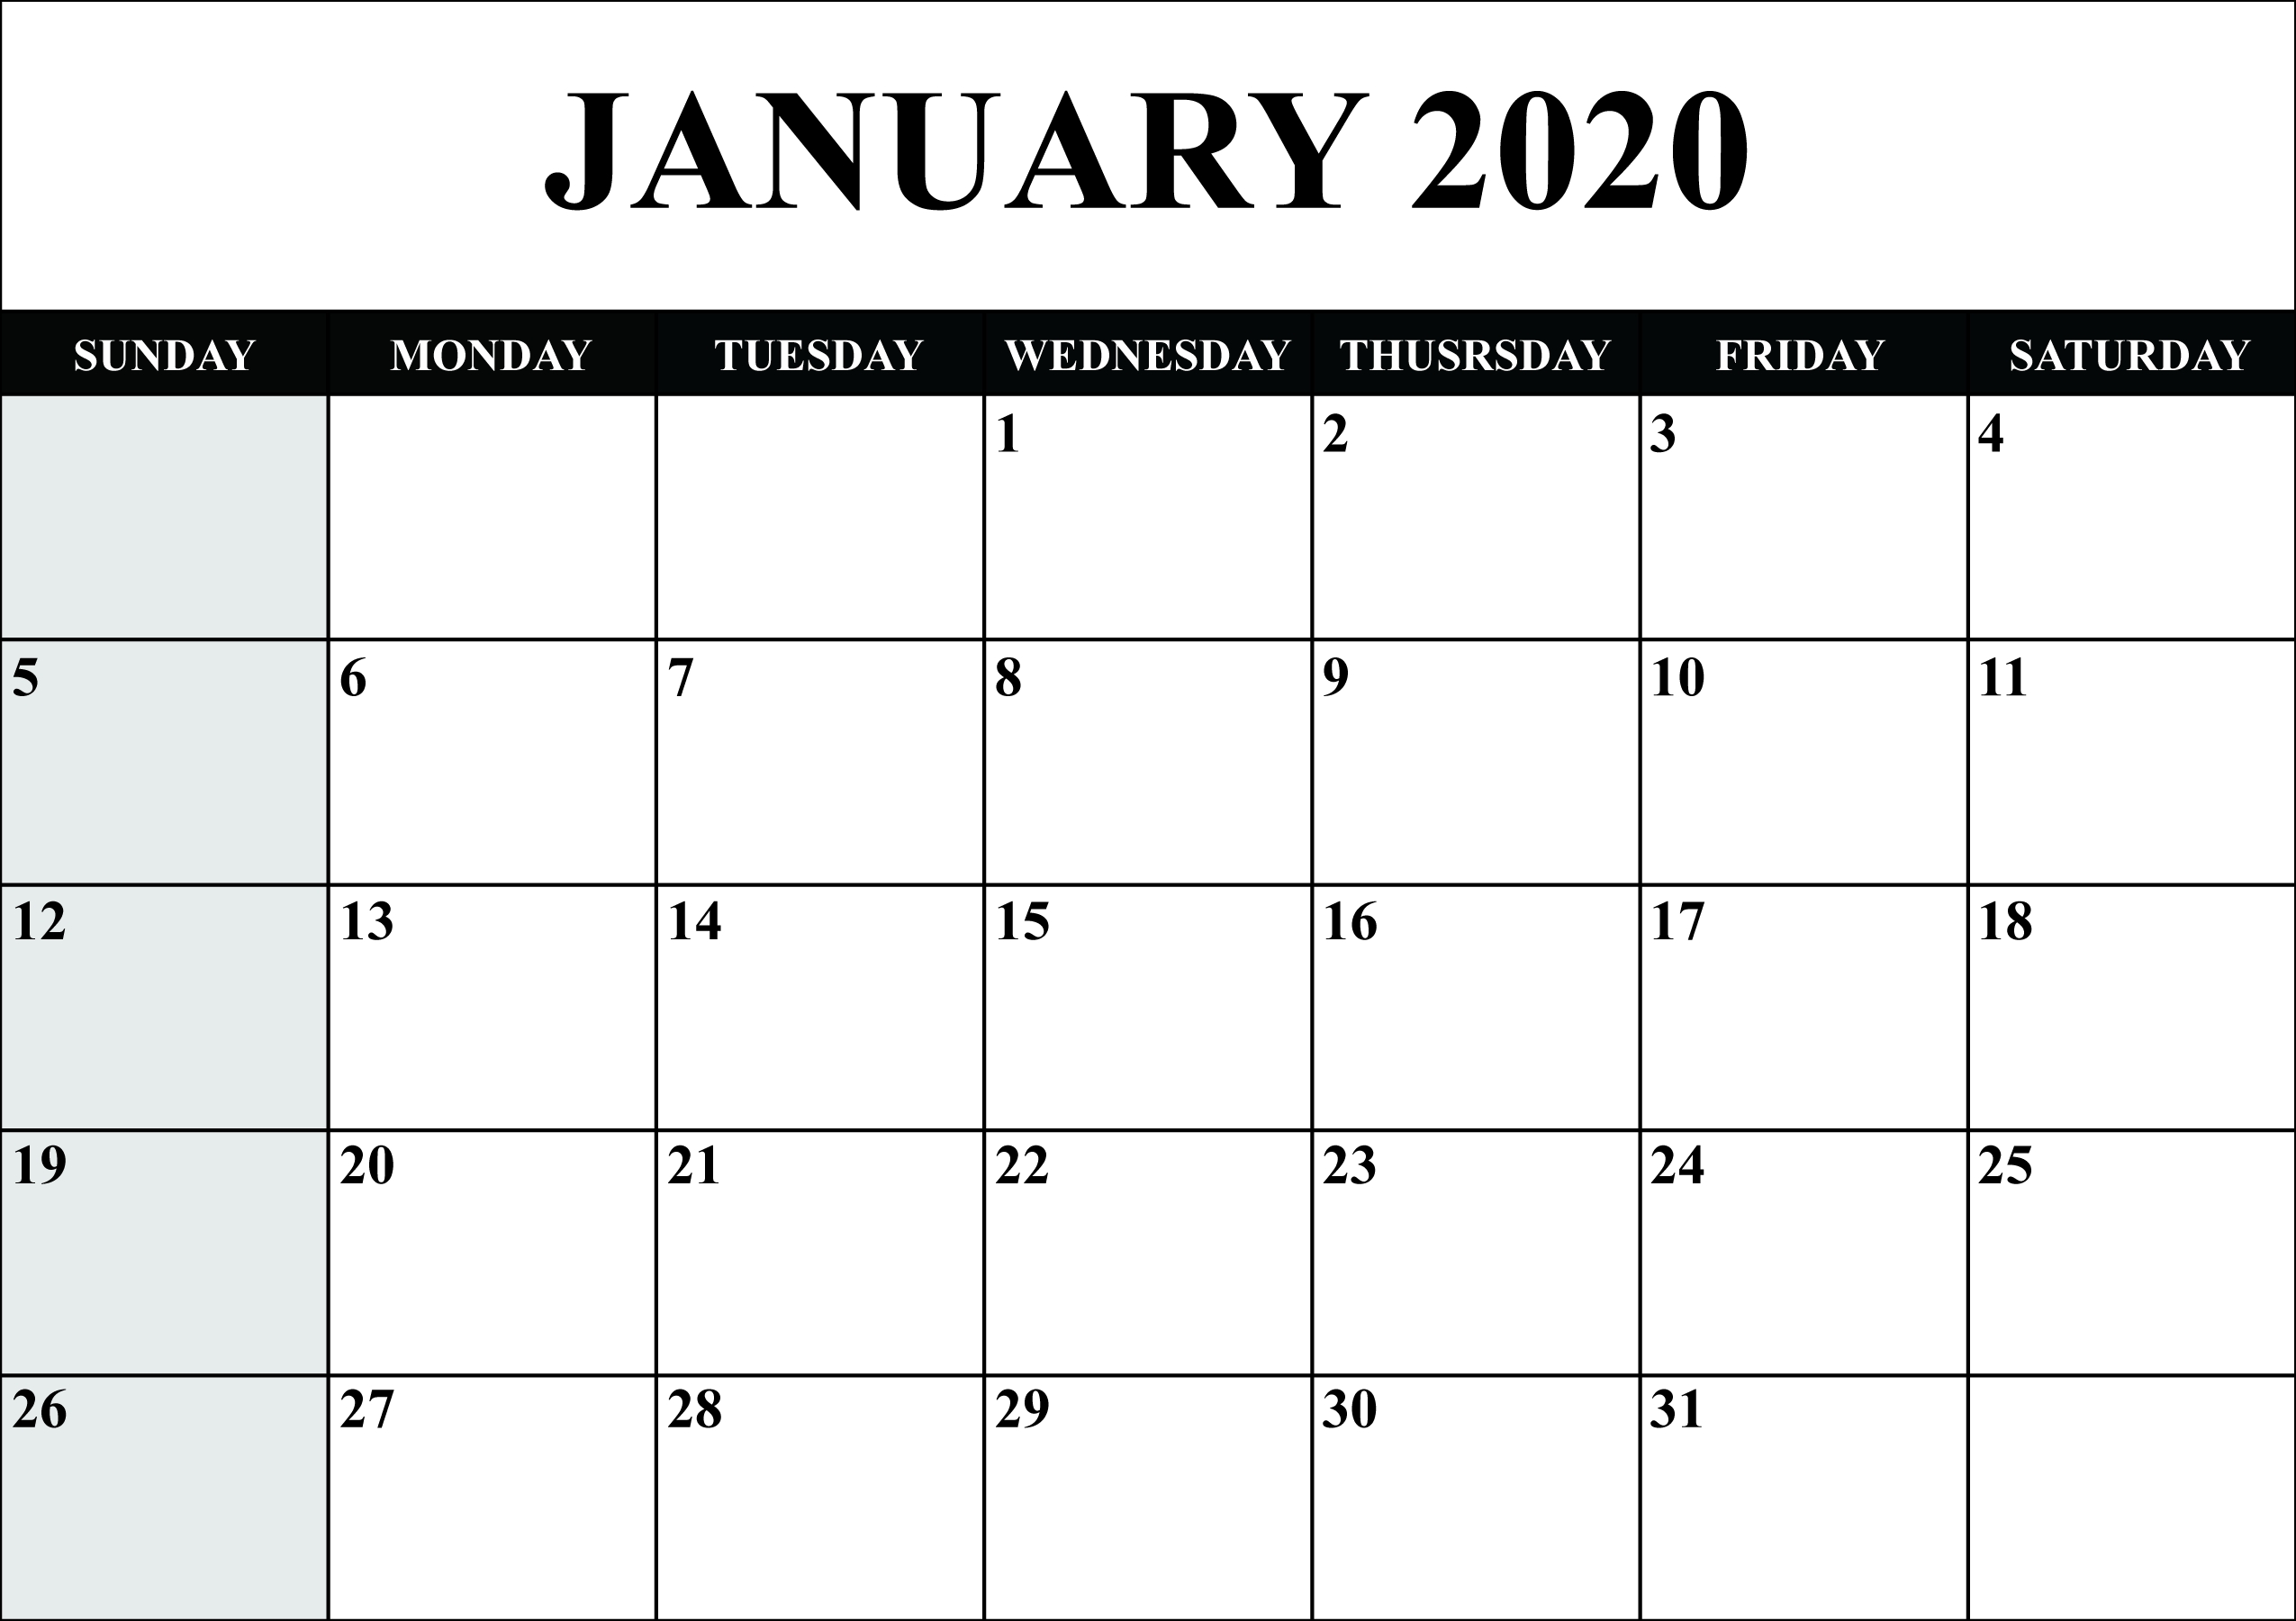 Free Blank January 2020 Calendar Printable In Pdf, Word with regard to Downloadable Calendar 2020 For Word